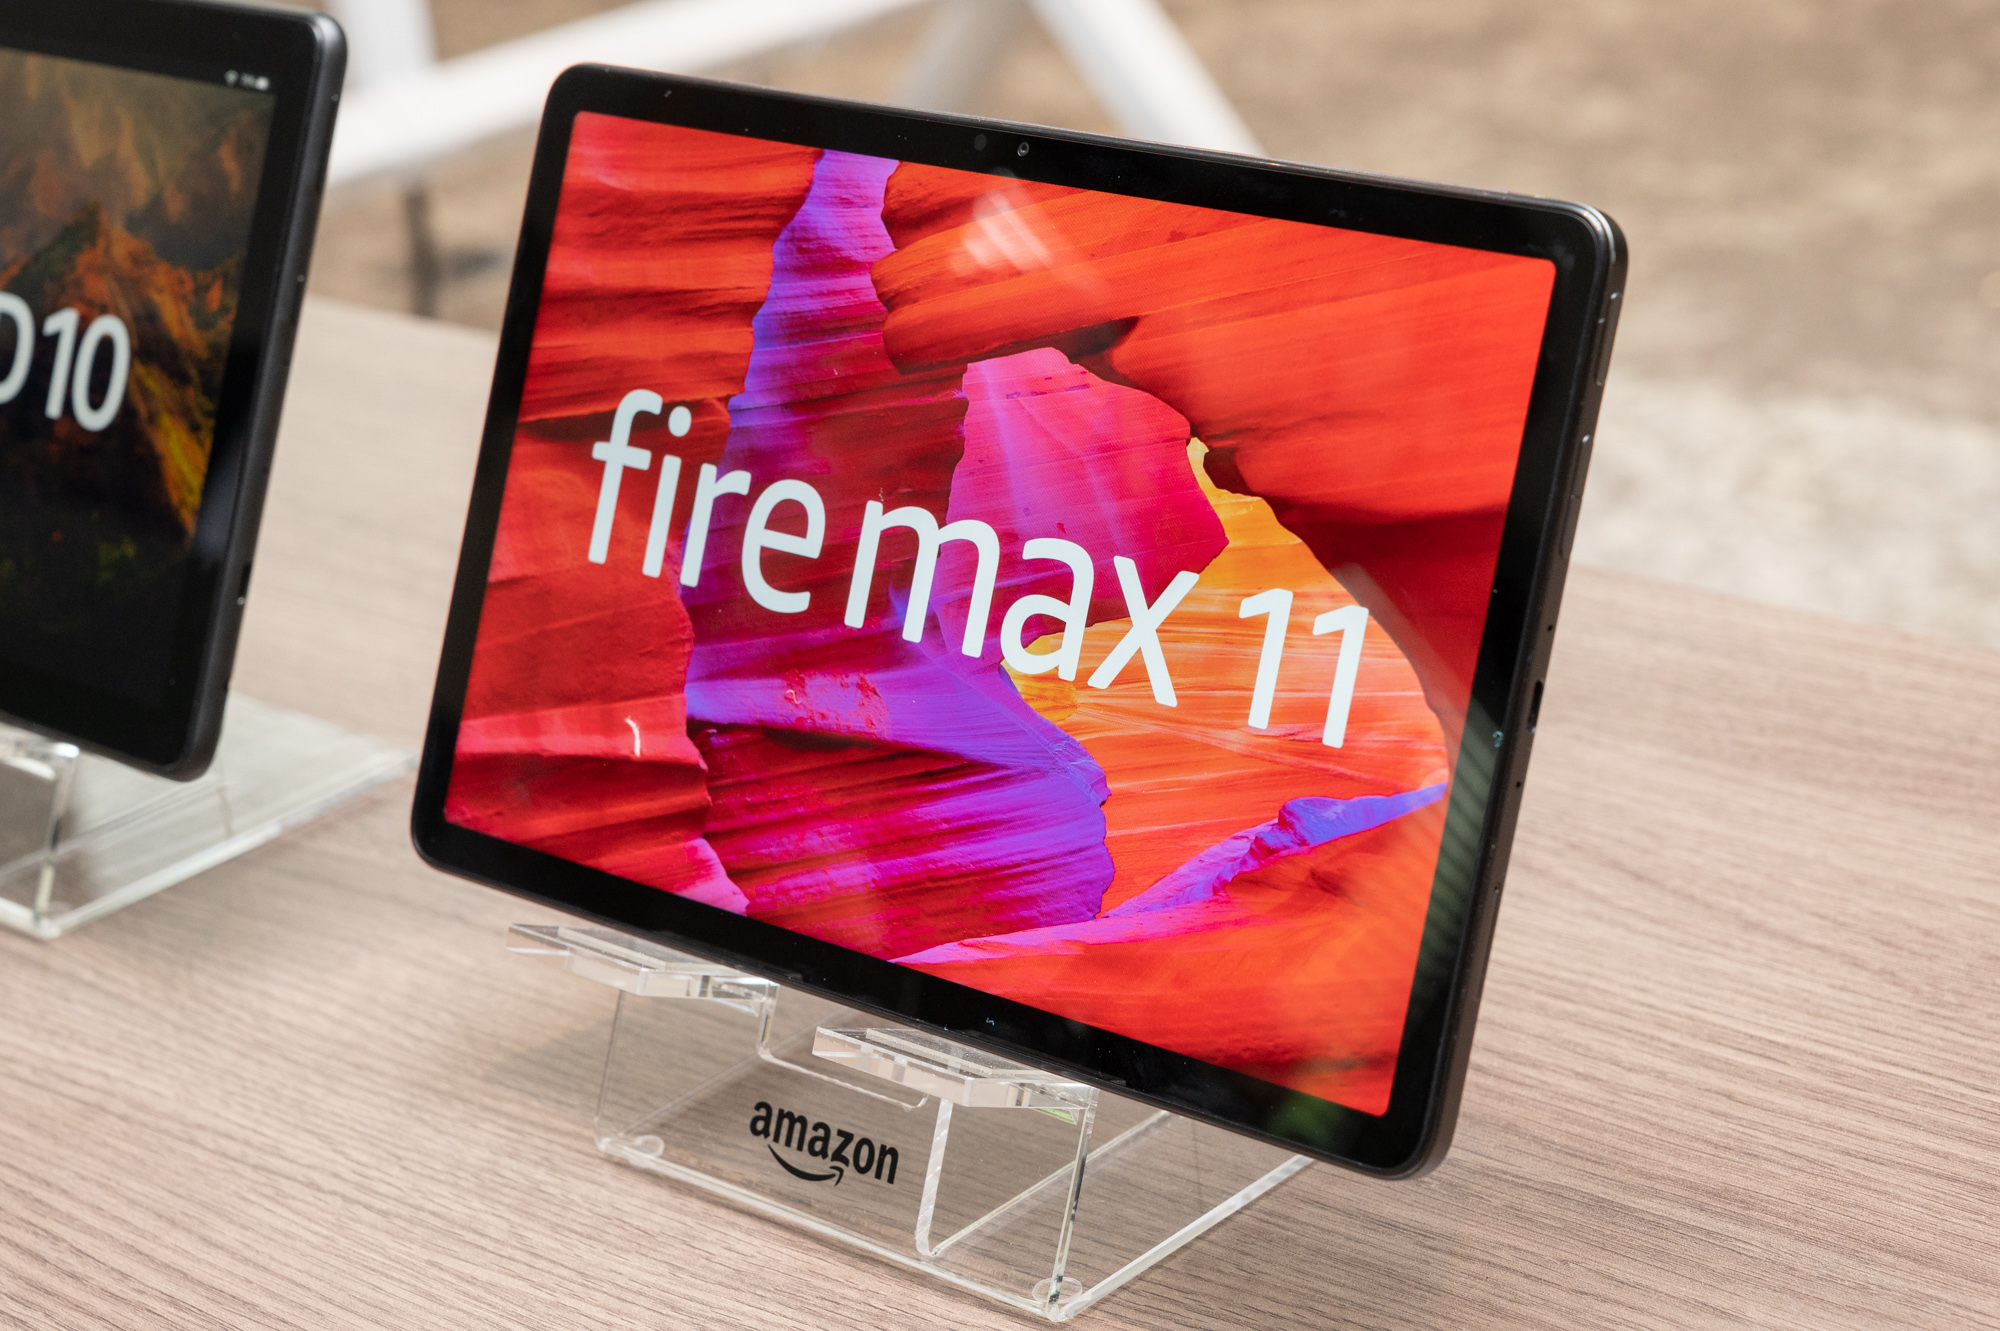 Fire Max 11 ４点セット Fireタブレット 2K キーボード ペン